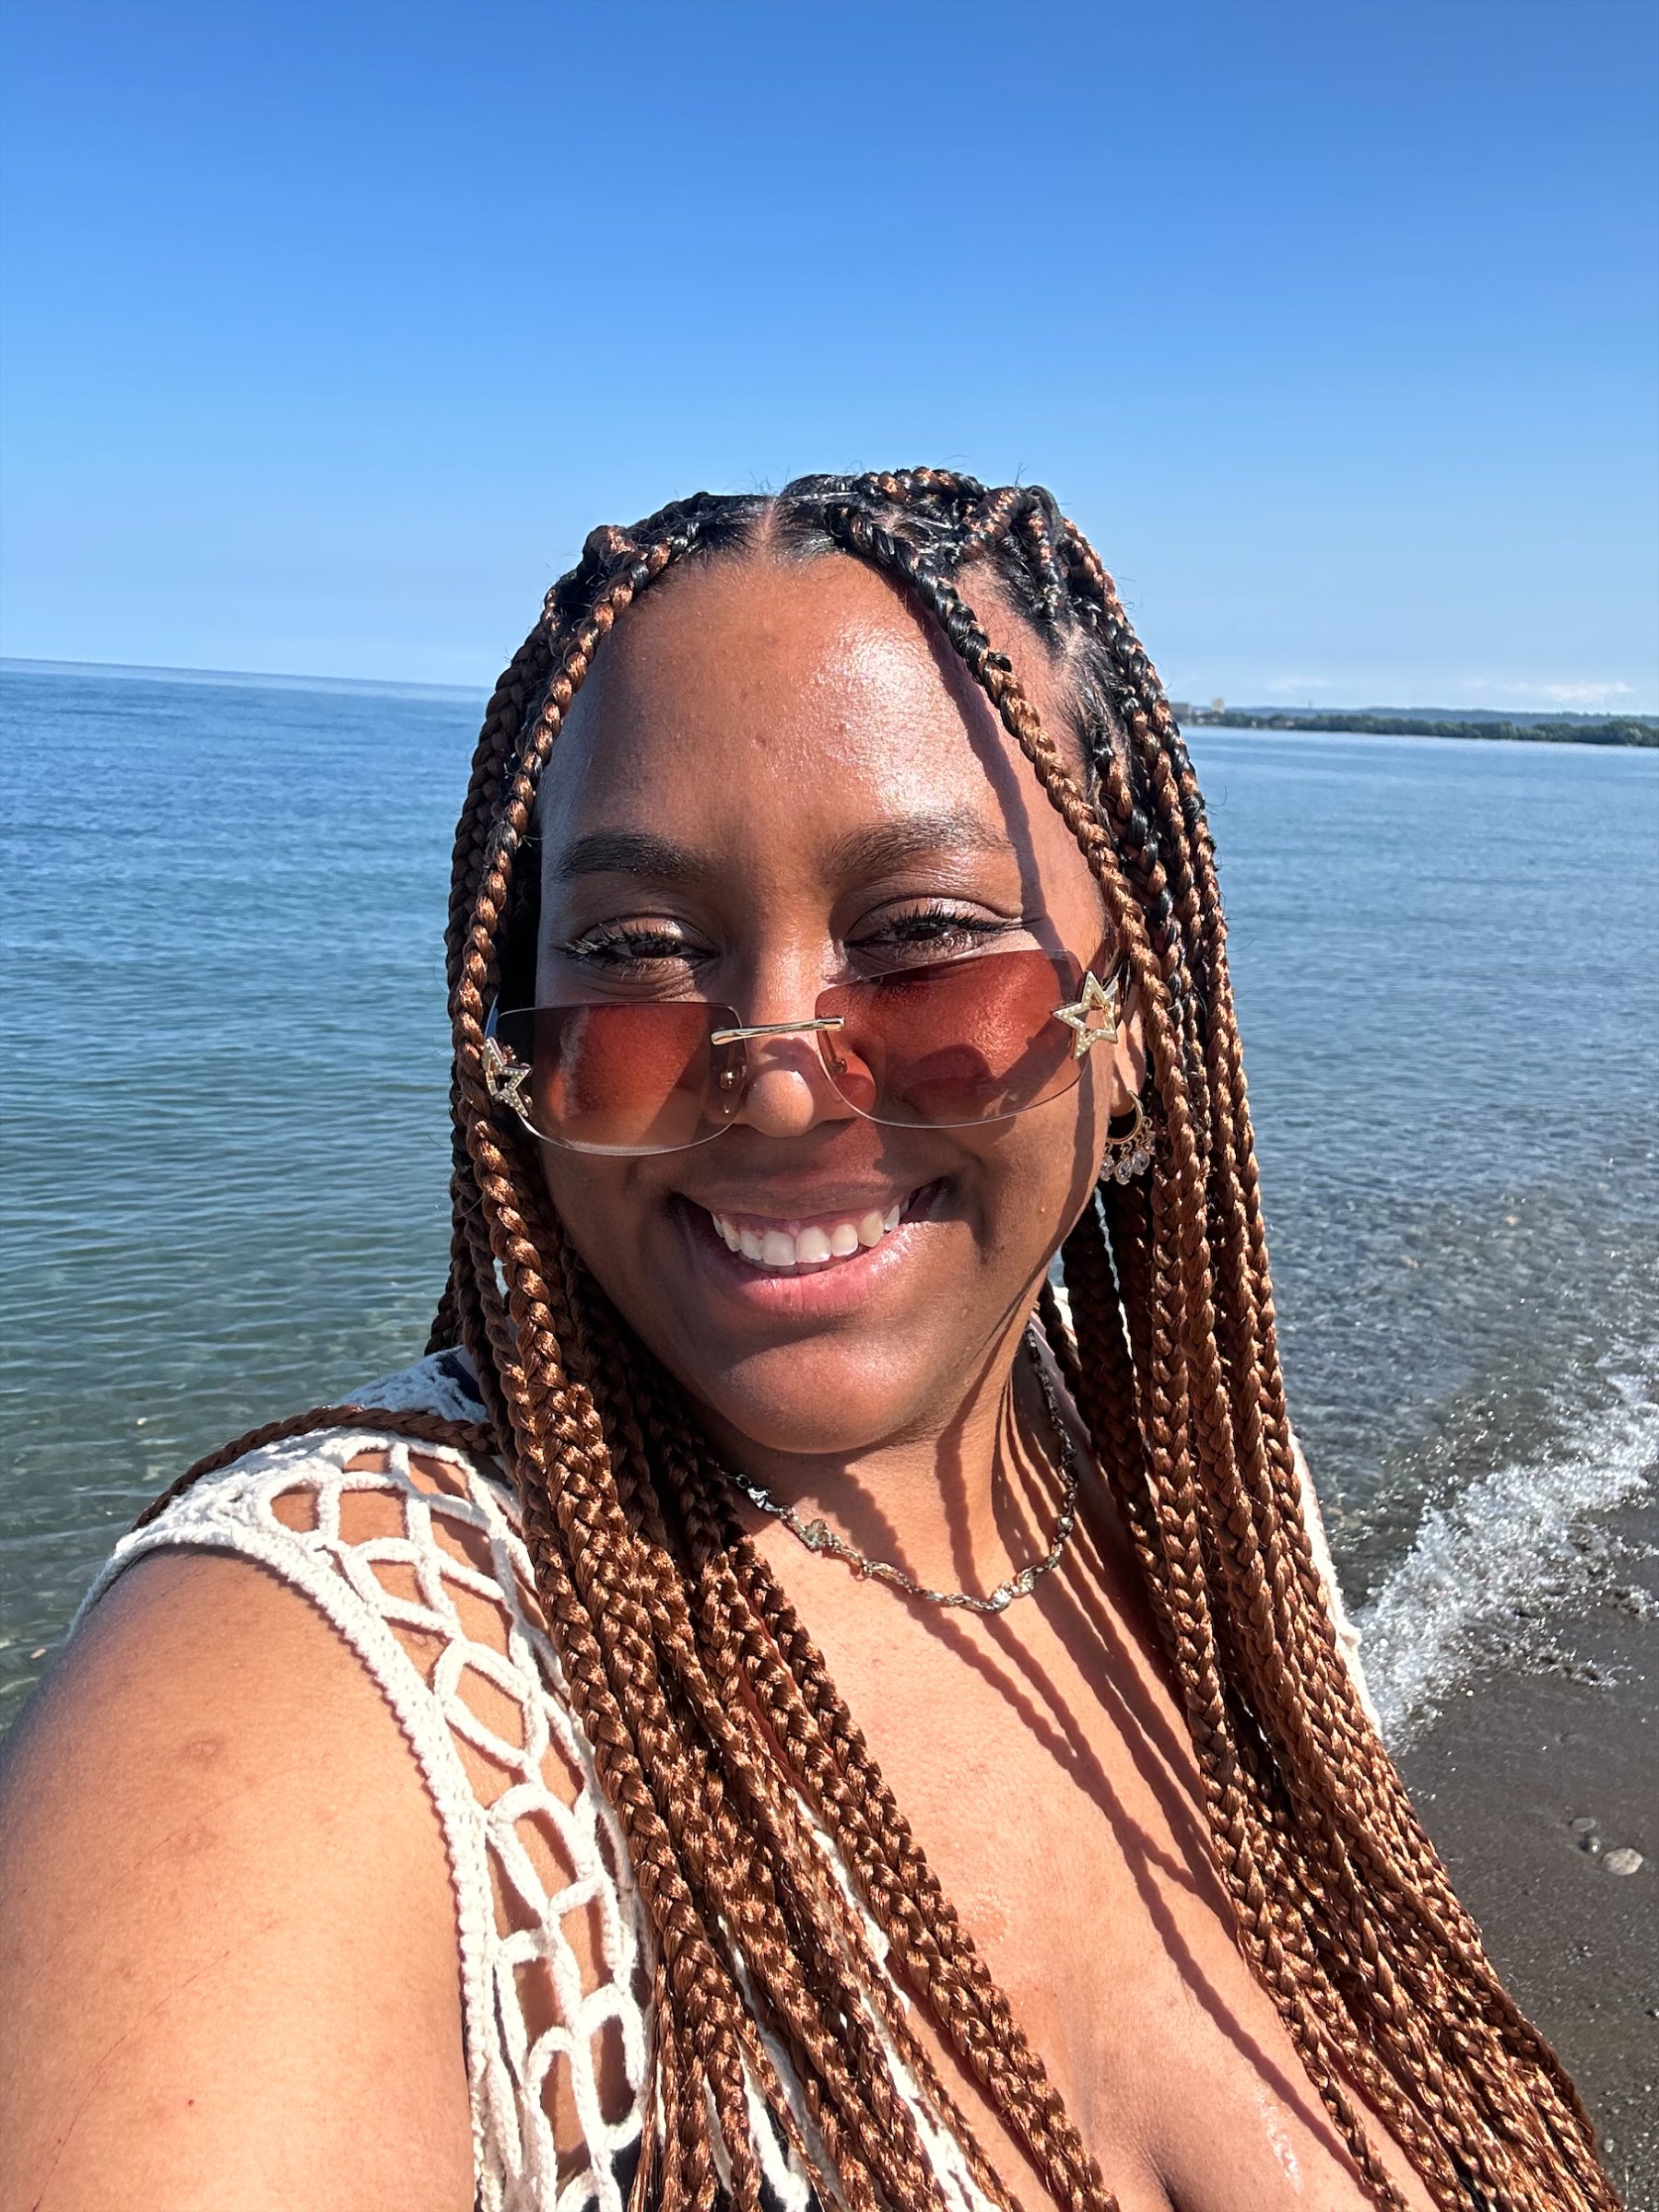 Portrait of Alyssa Vernon standing in front of a body of water. They are wearing sun glasses and have a smile on their face.